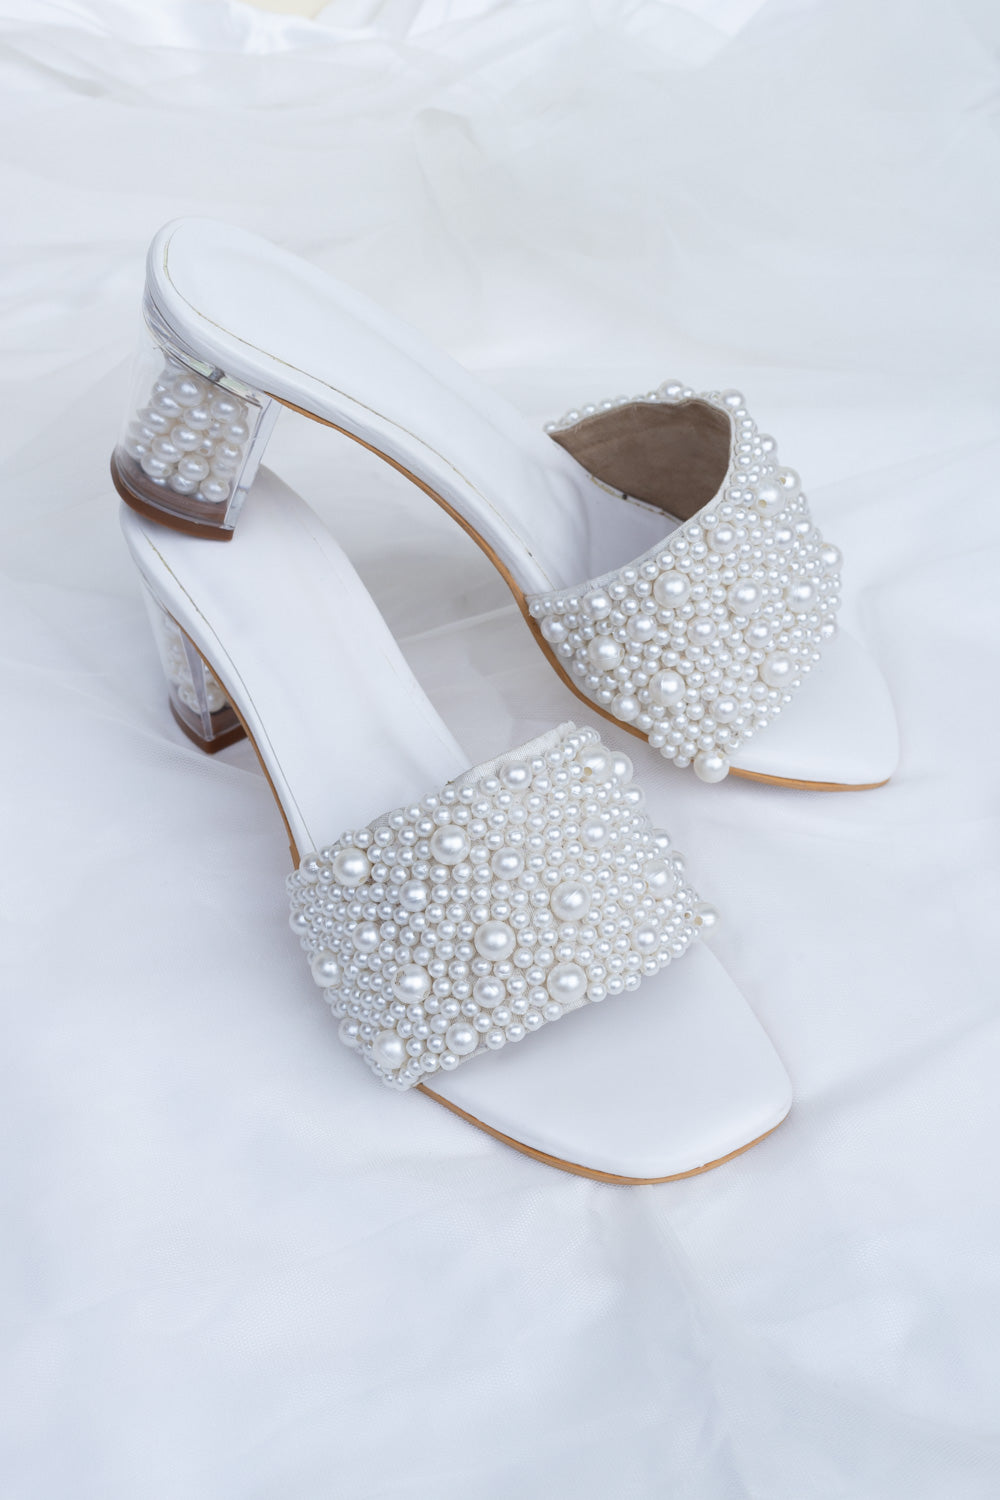 Slingback Block Heel Wedding Shoes with Tulle Bow